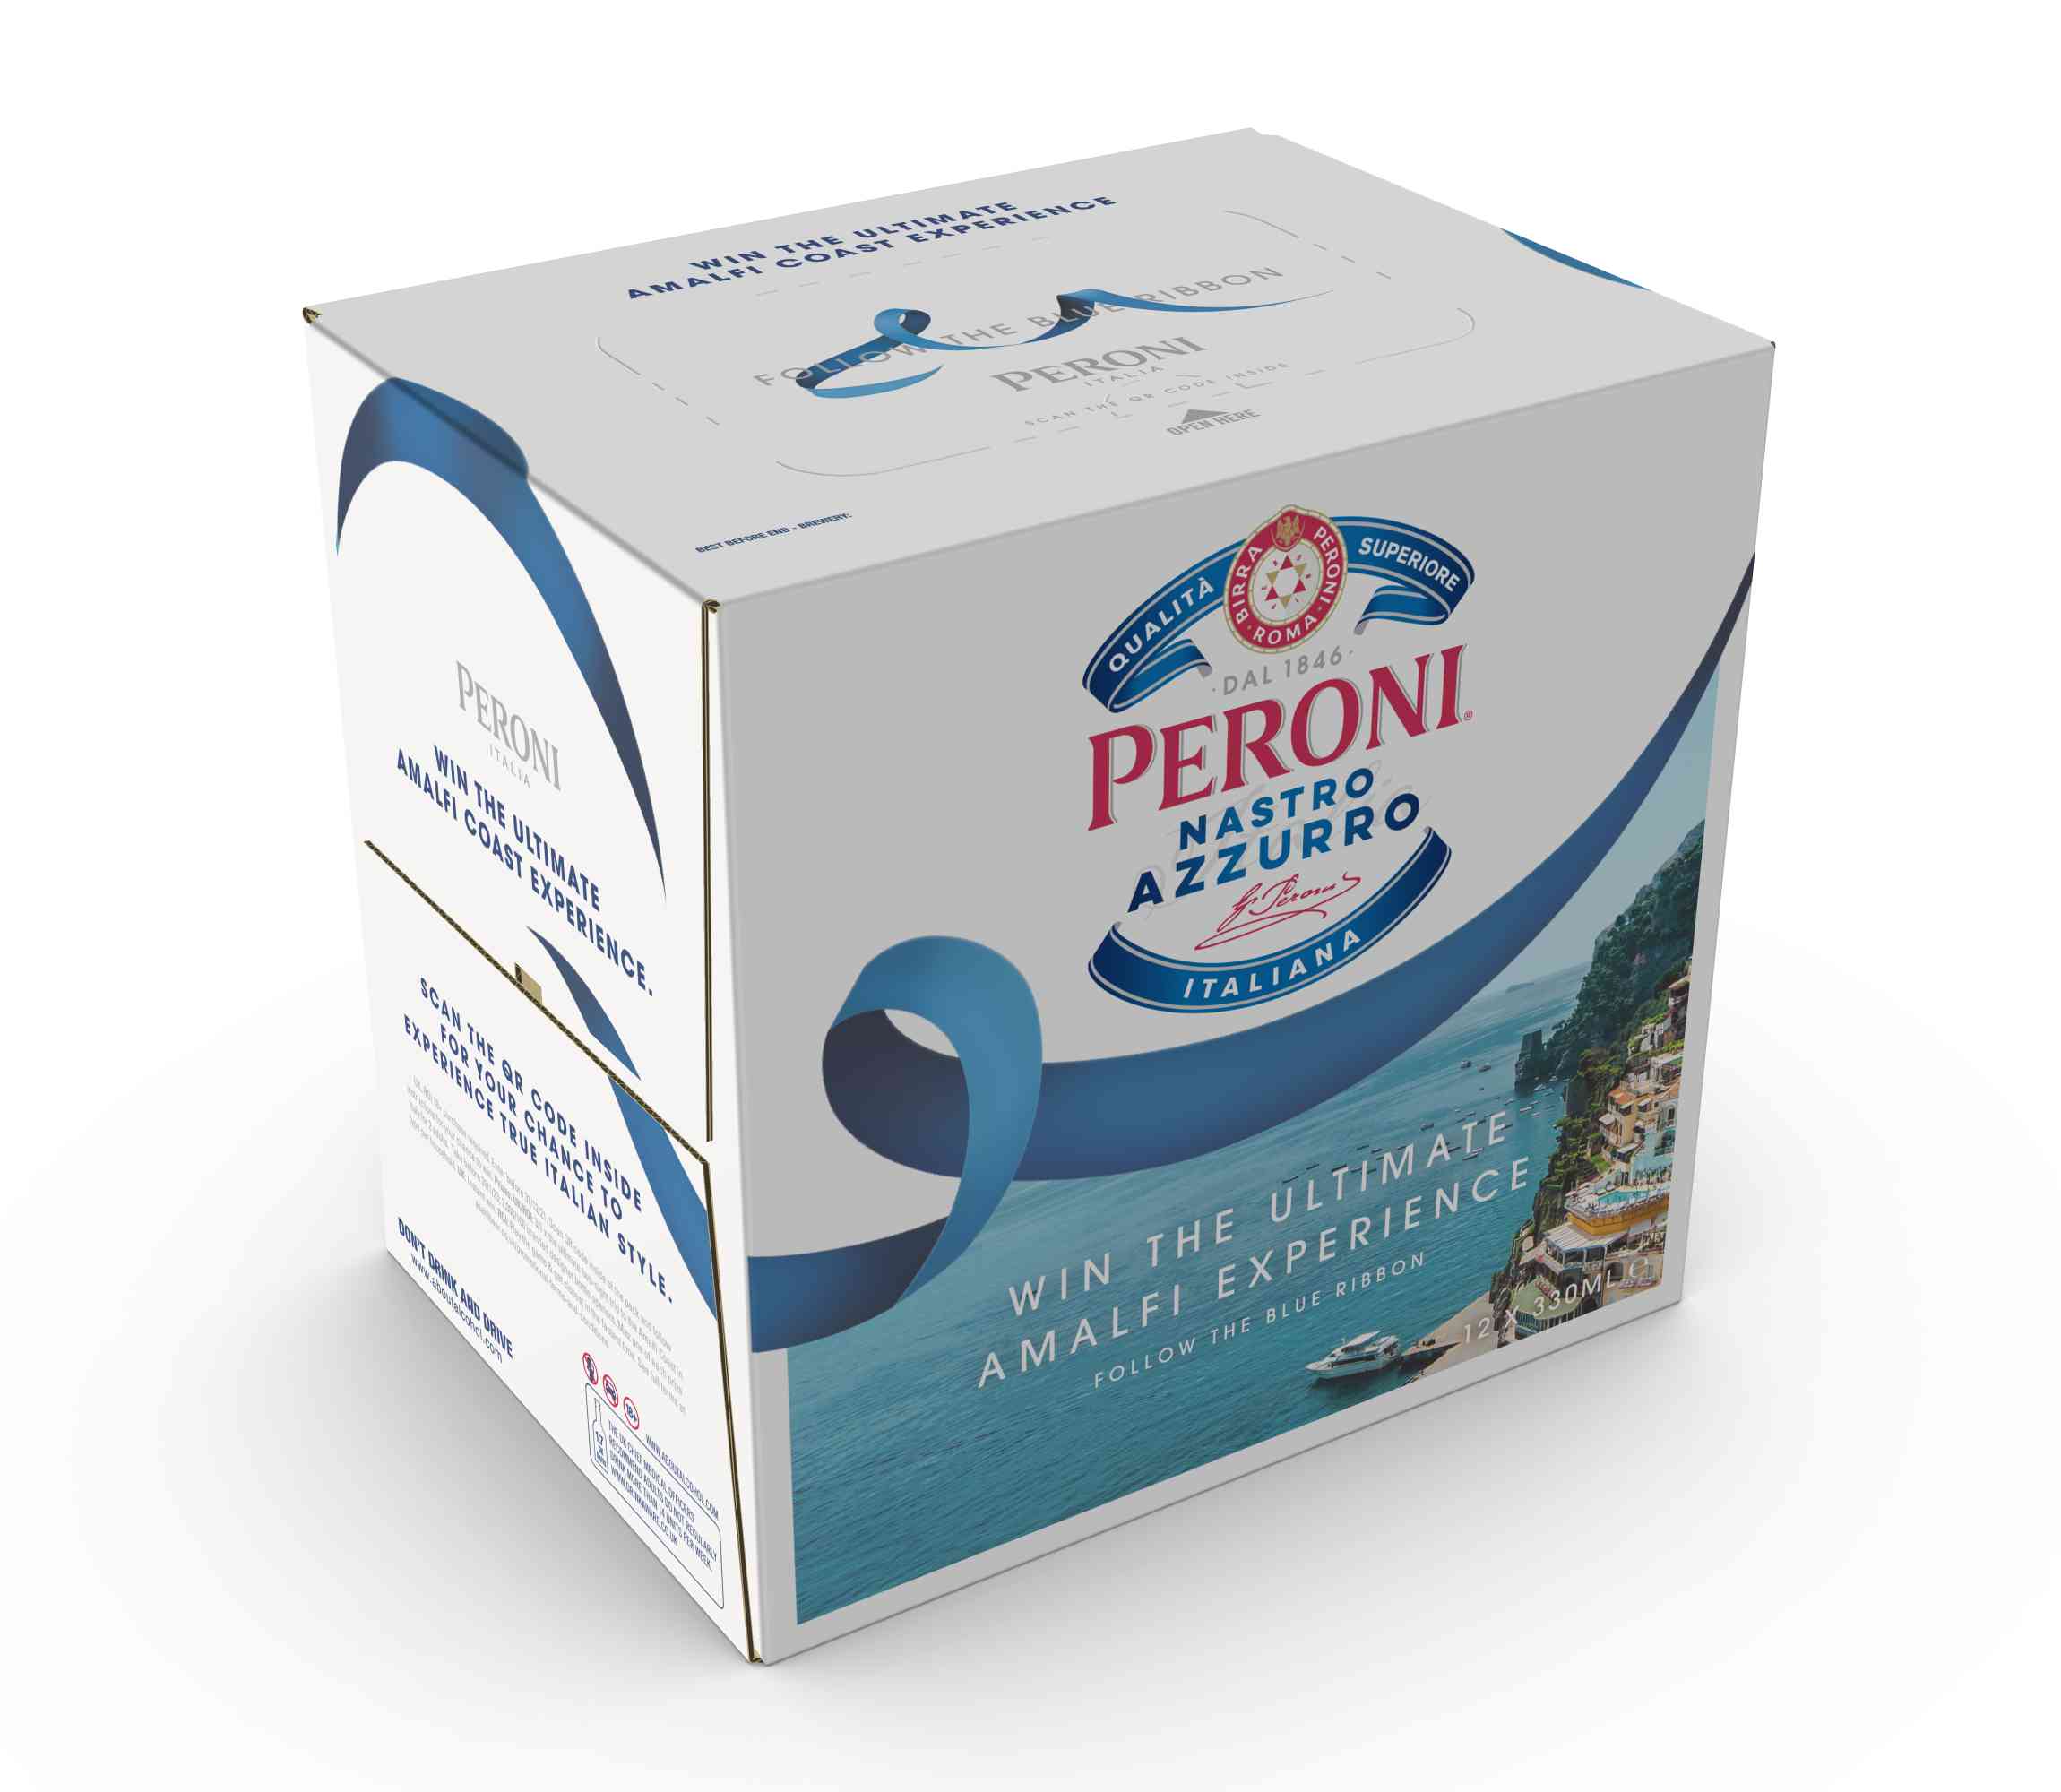 Peroni Nastro Azzuro offers trip to Amalfi Coast in new on-pack promotion